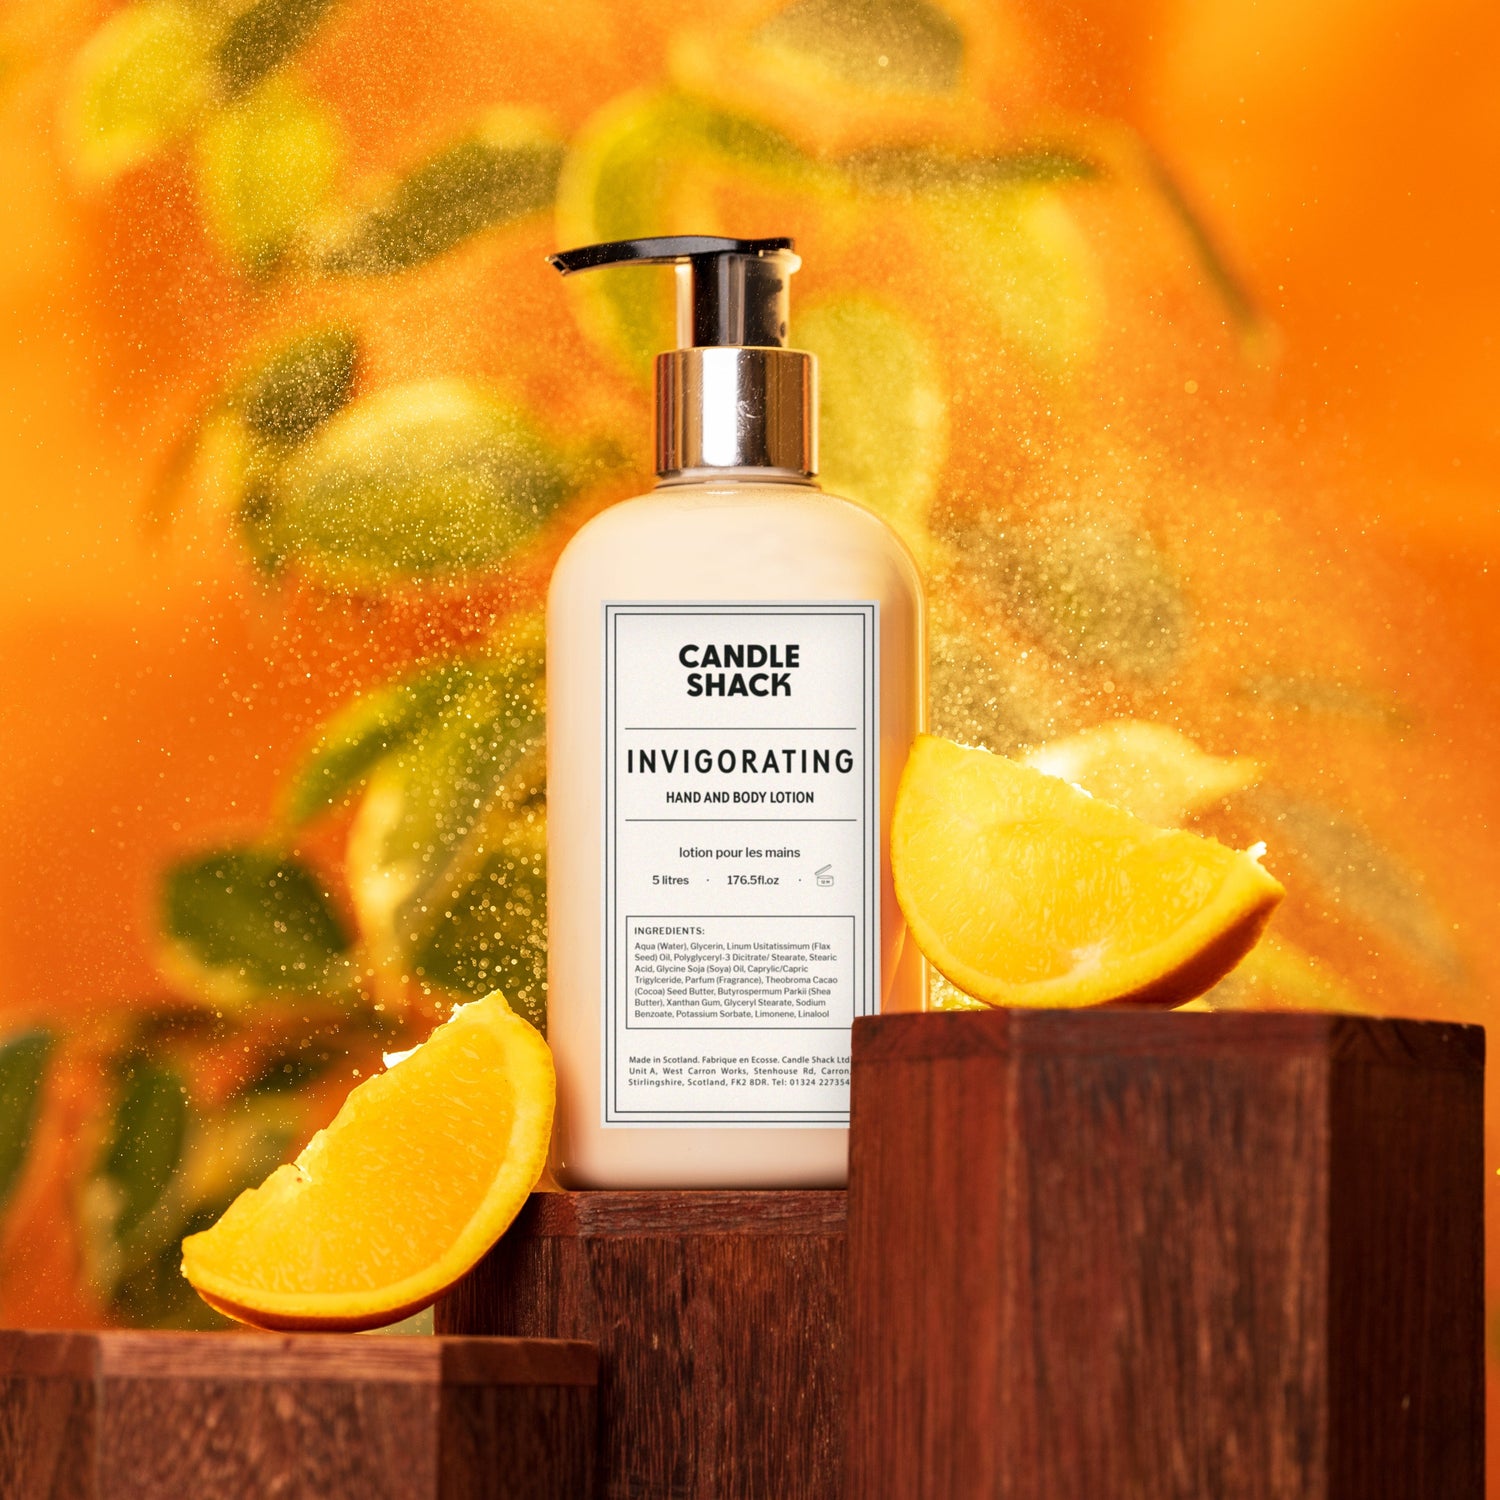 Candle Shack Soap Hand and Body Lotion - Invigorating